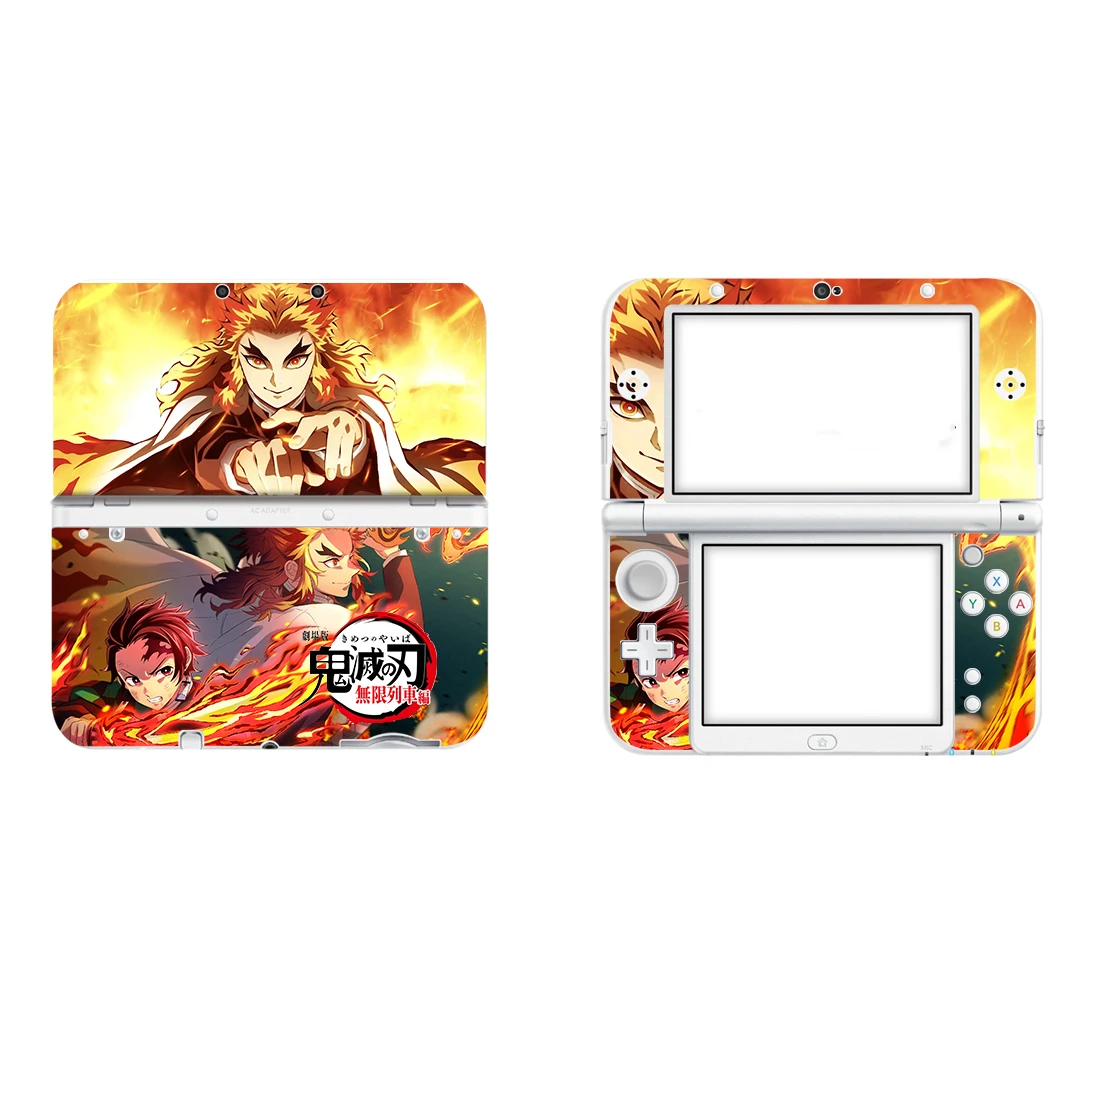 Demon Slayer Full Cover Decal Skin Sticker for NEW 3DS XL Skins Stickers for NEW 3DS LL Vinyl Protector Skin Sticker